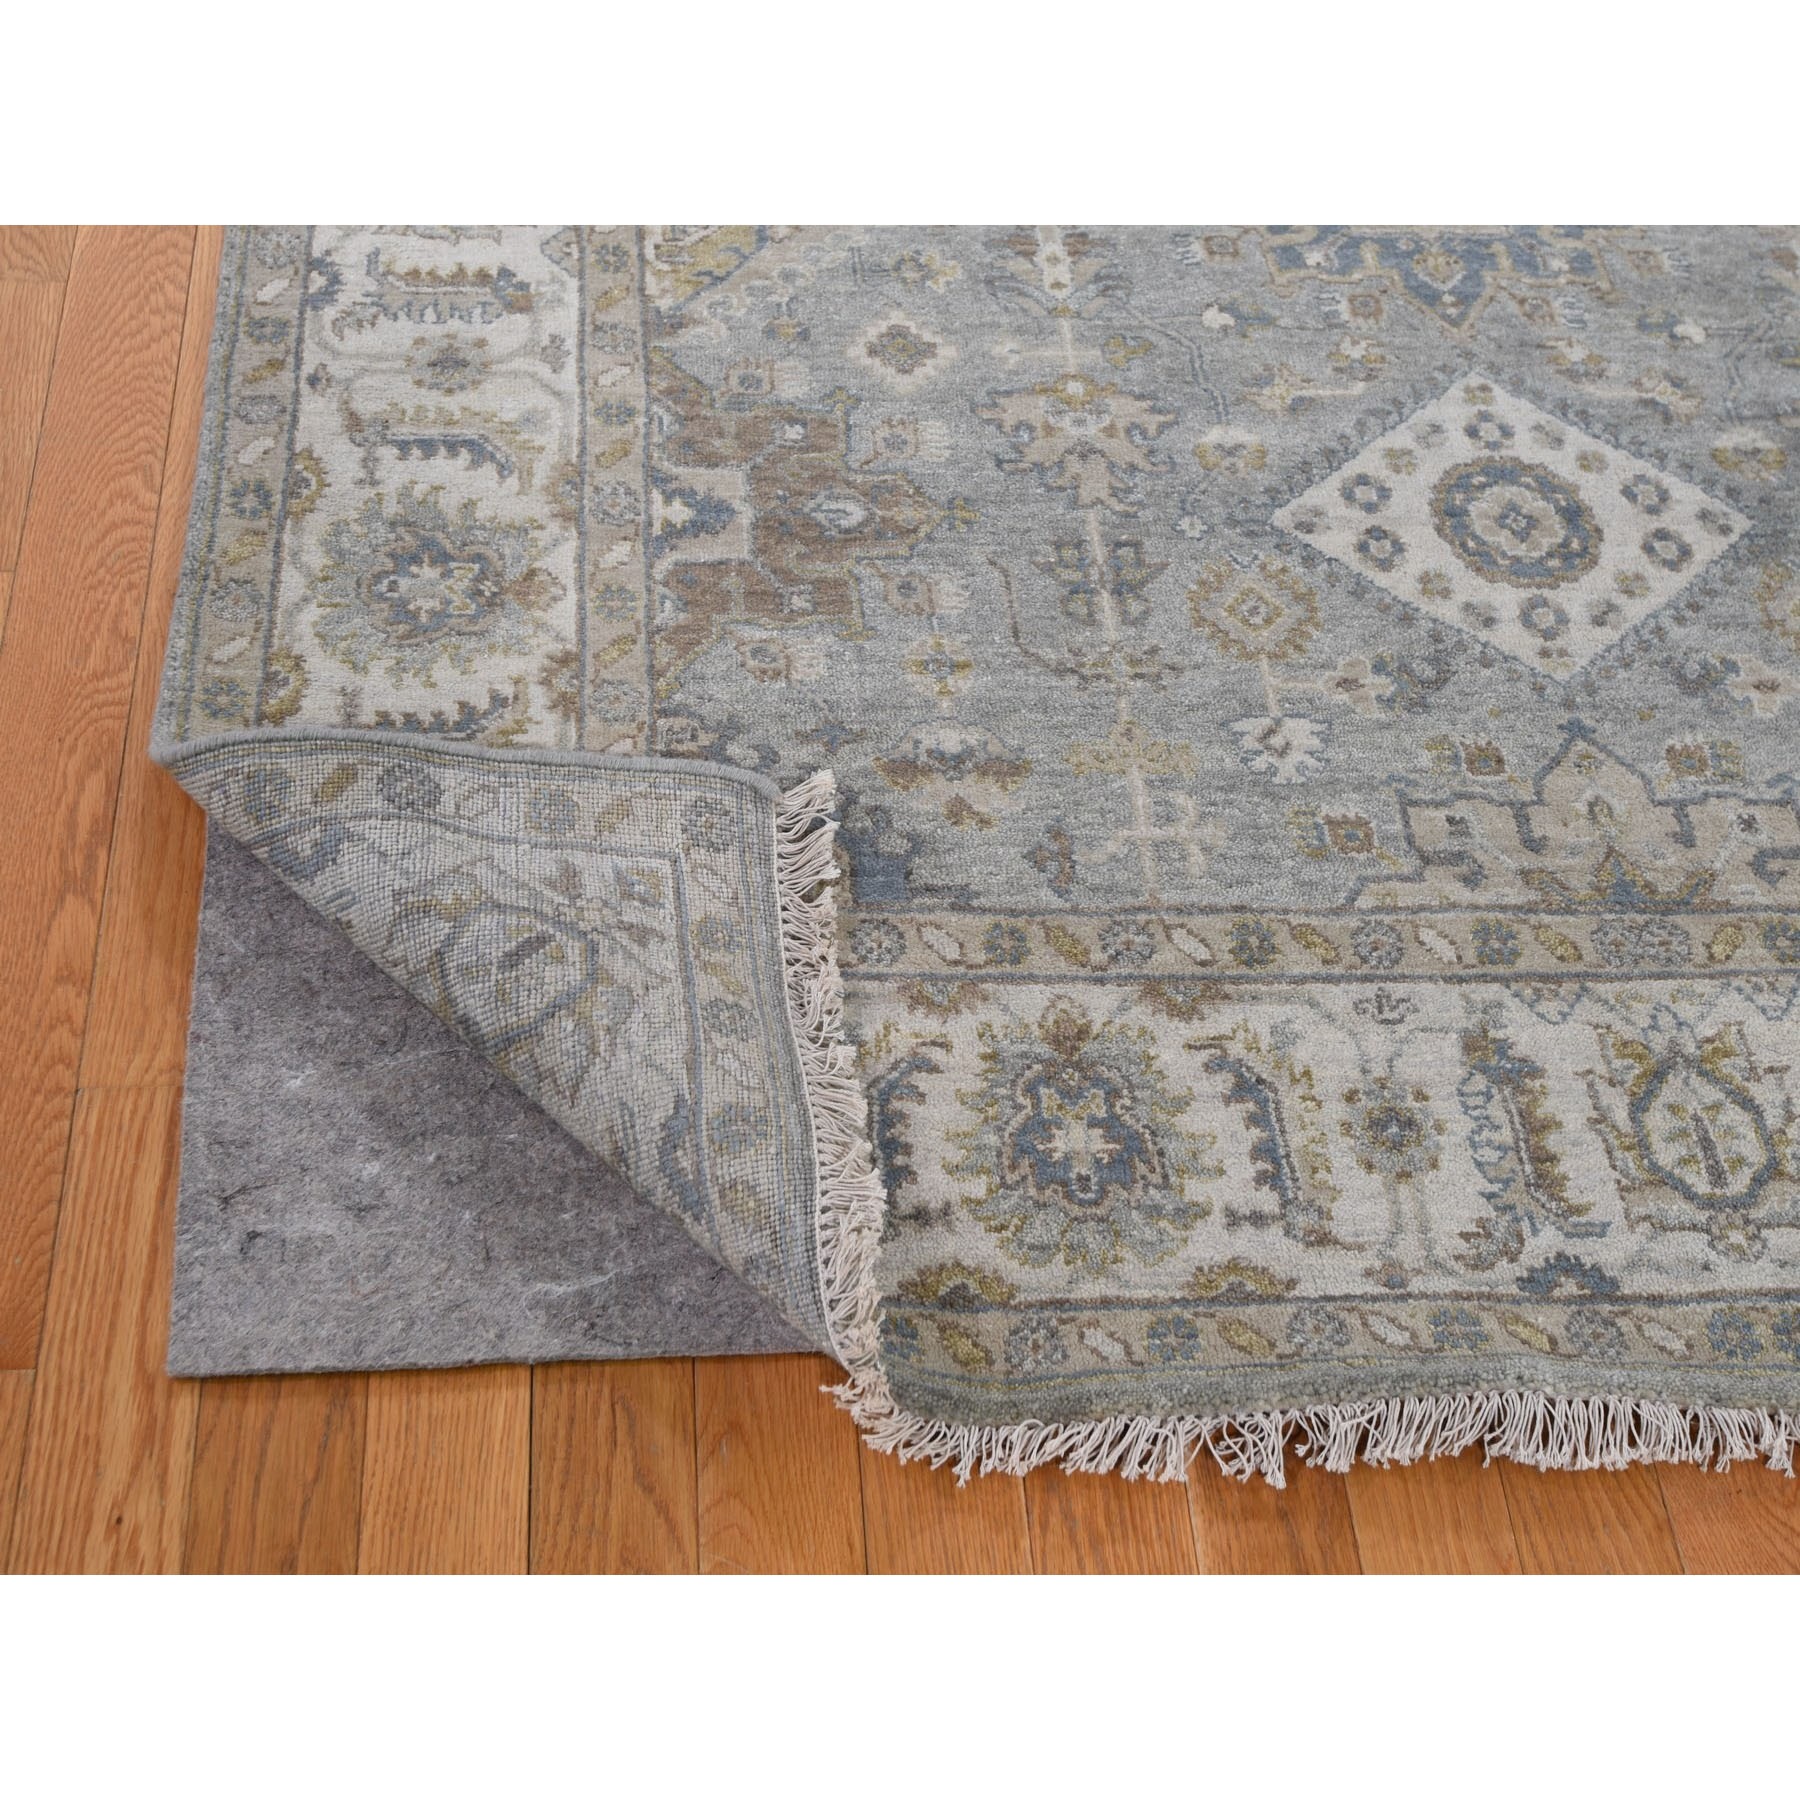 5-1 x5-1  Square Gray Karajeh Design Pure Wool Hand Knotted Oriental Rug 